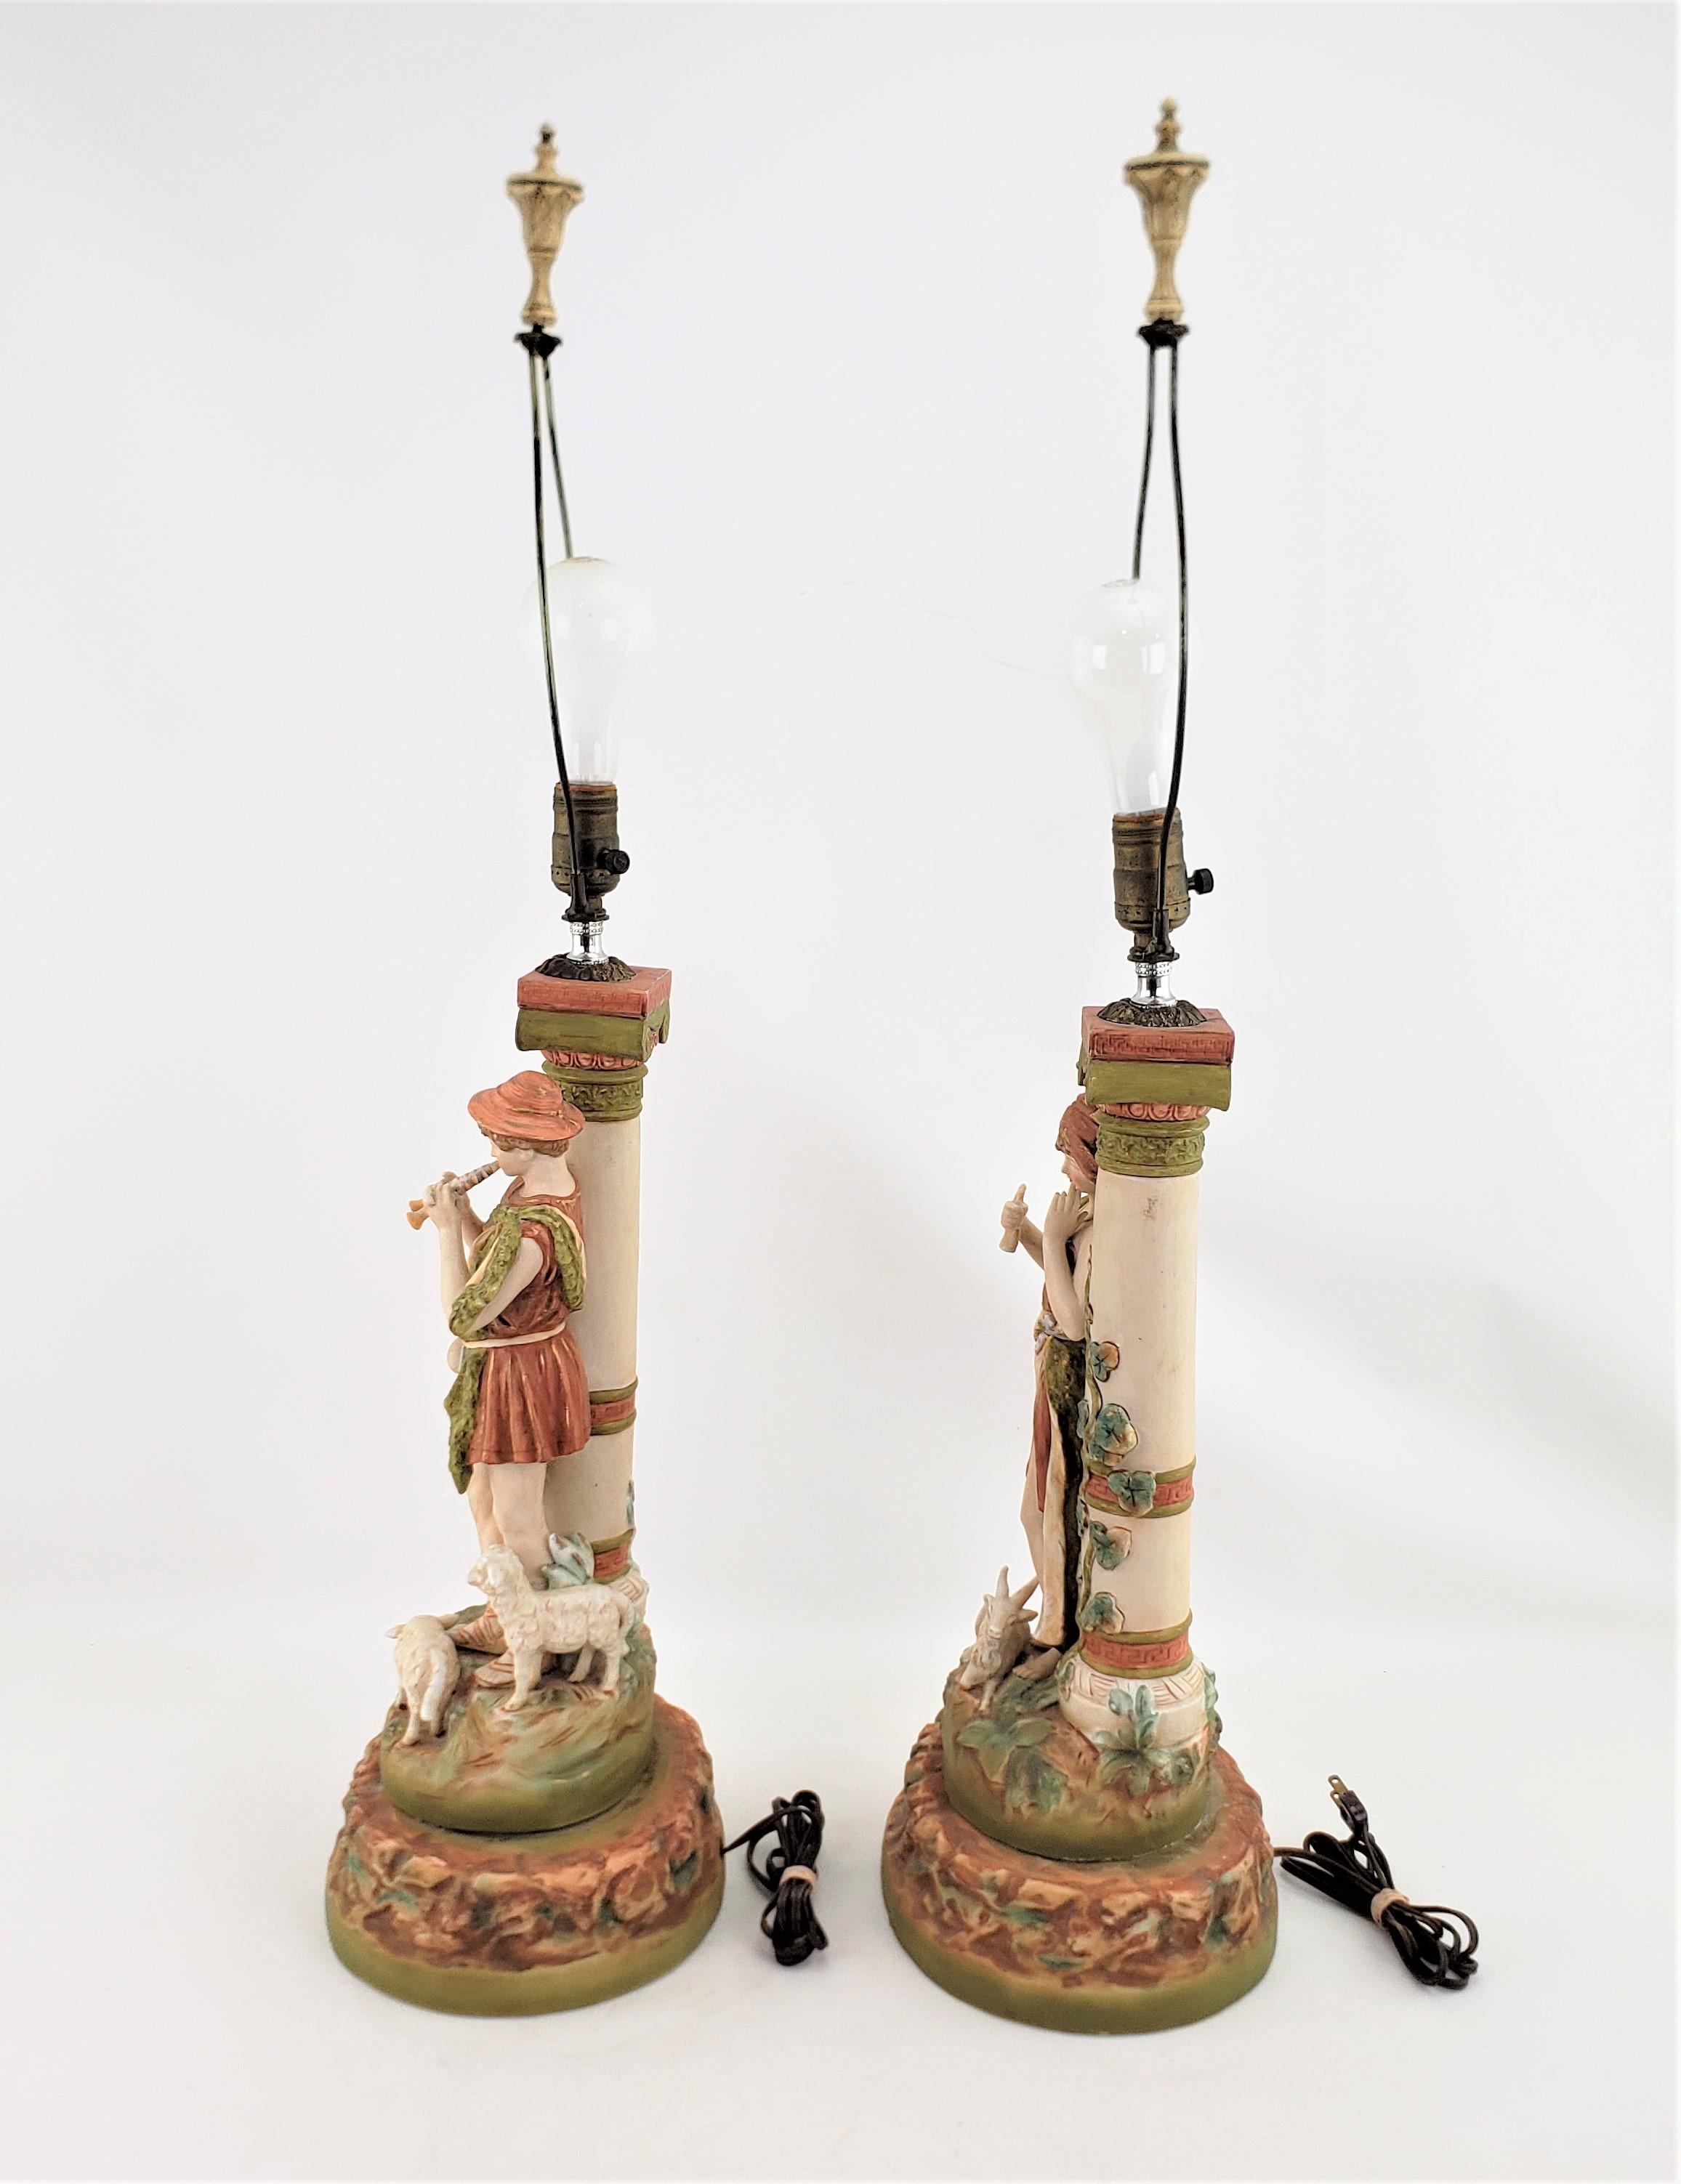 Pair of Large Antique Royal Dux Attributed Table Lamps with Neoclassical Figures In Good Condition For Sale In Hamilton, Ontario